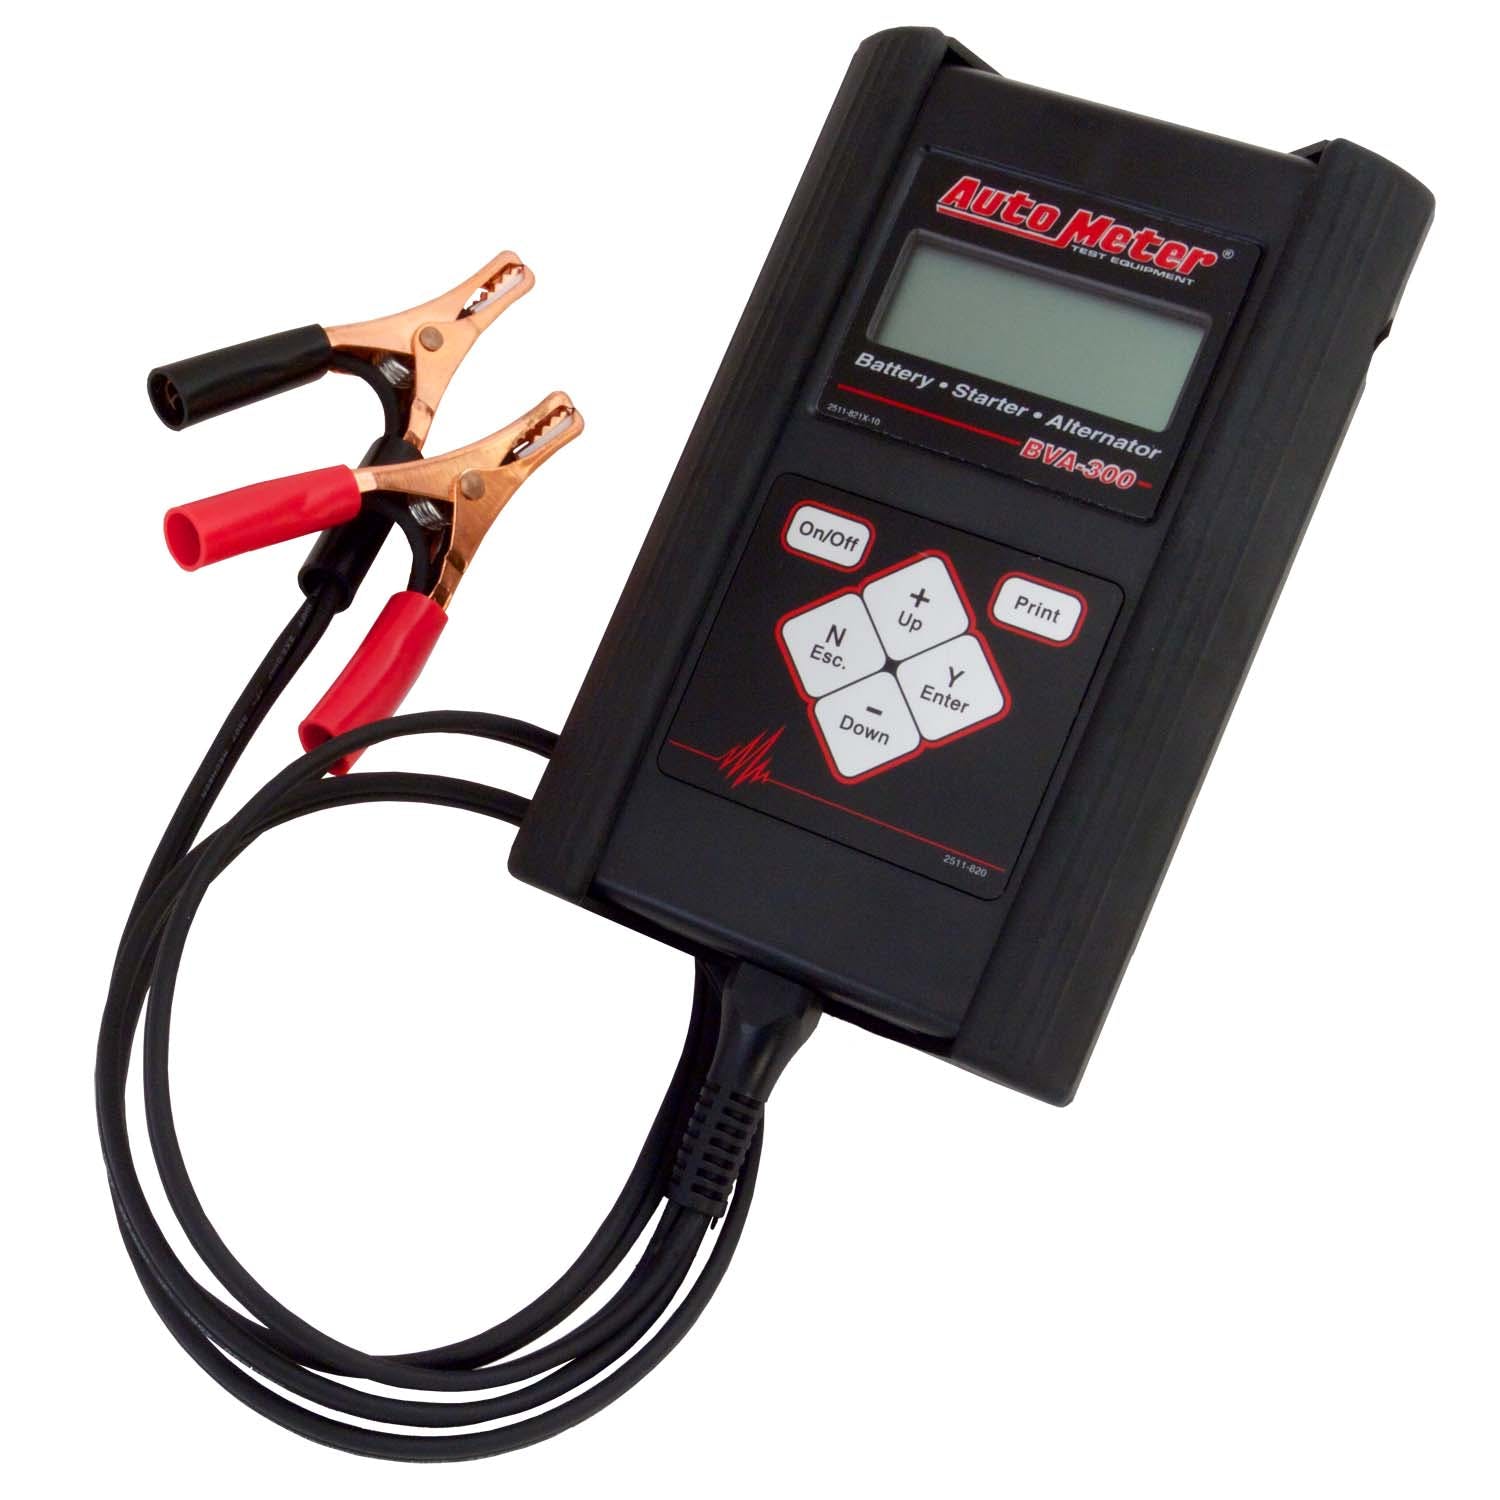 AutoMeter Products BVA-300 Battery Tester